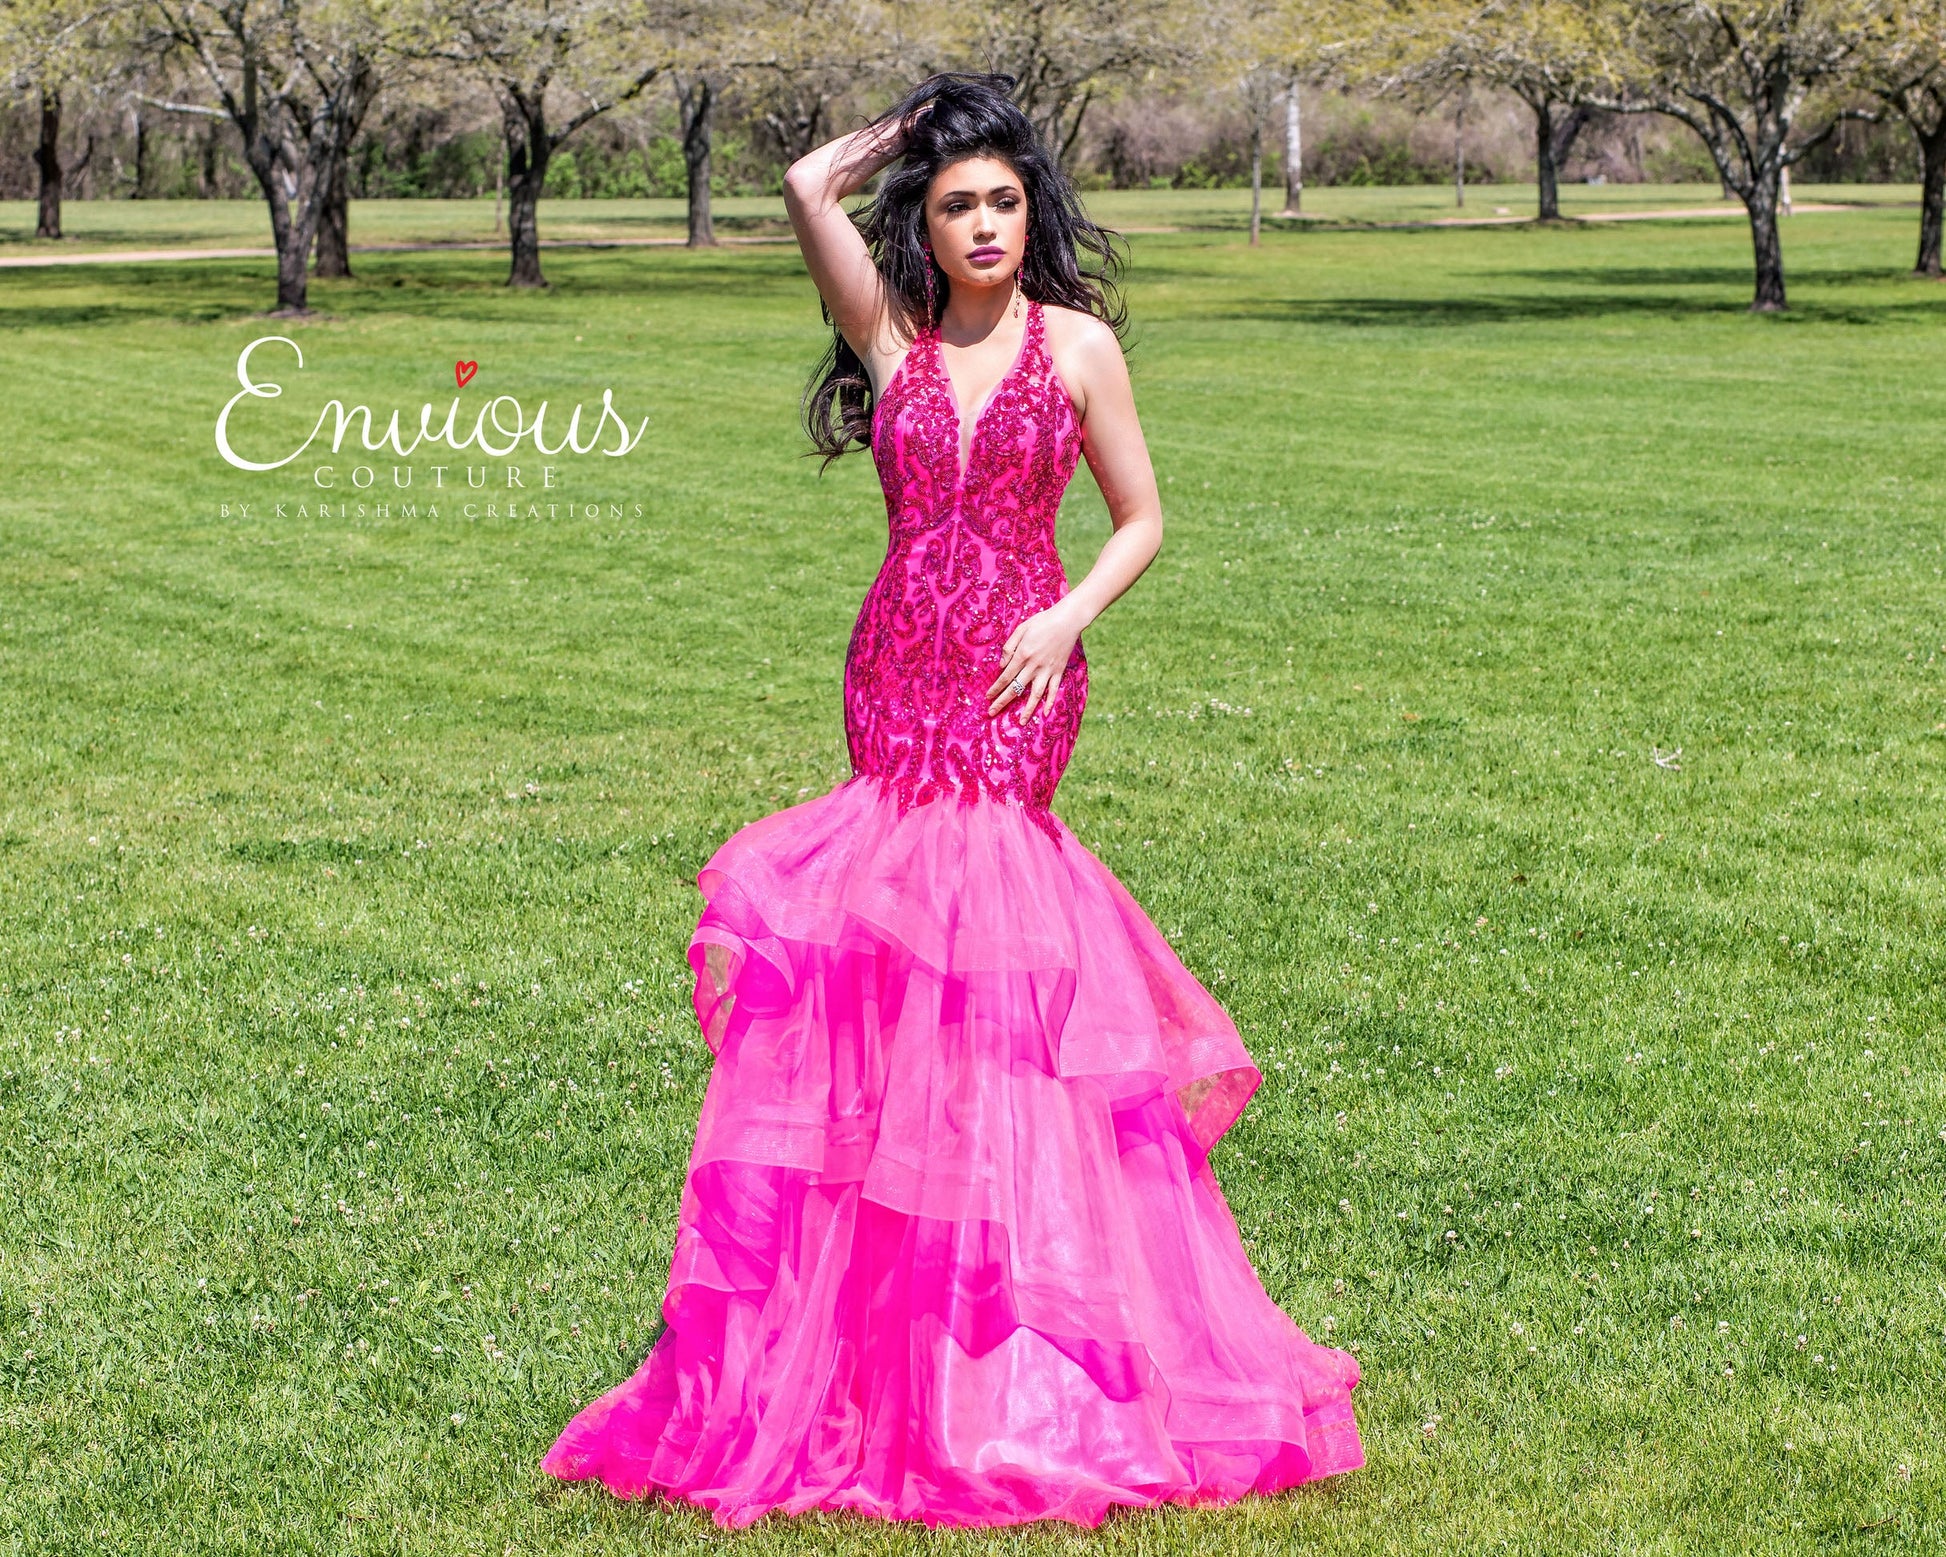 Envious-Couture-E1516-Fuchsia-Prom-Dress-Front-Emebllished-V-Neckline-Sequin-Fit-and-Flare-Layered-Mermaid-Skirt